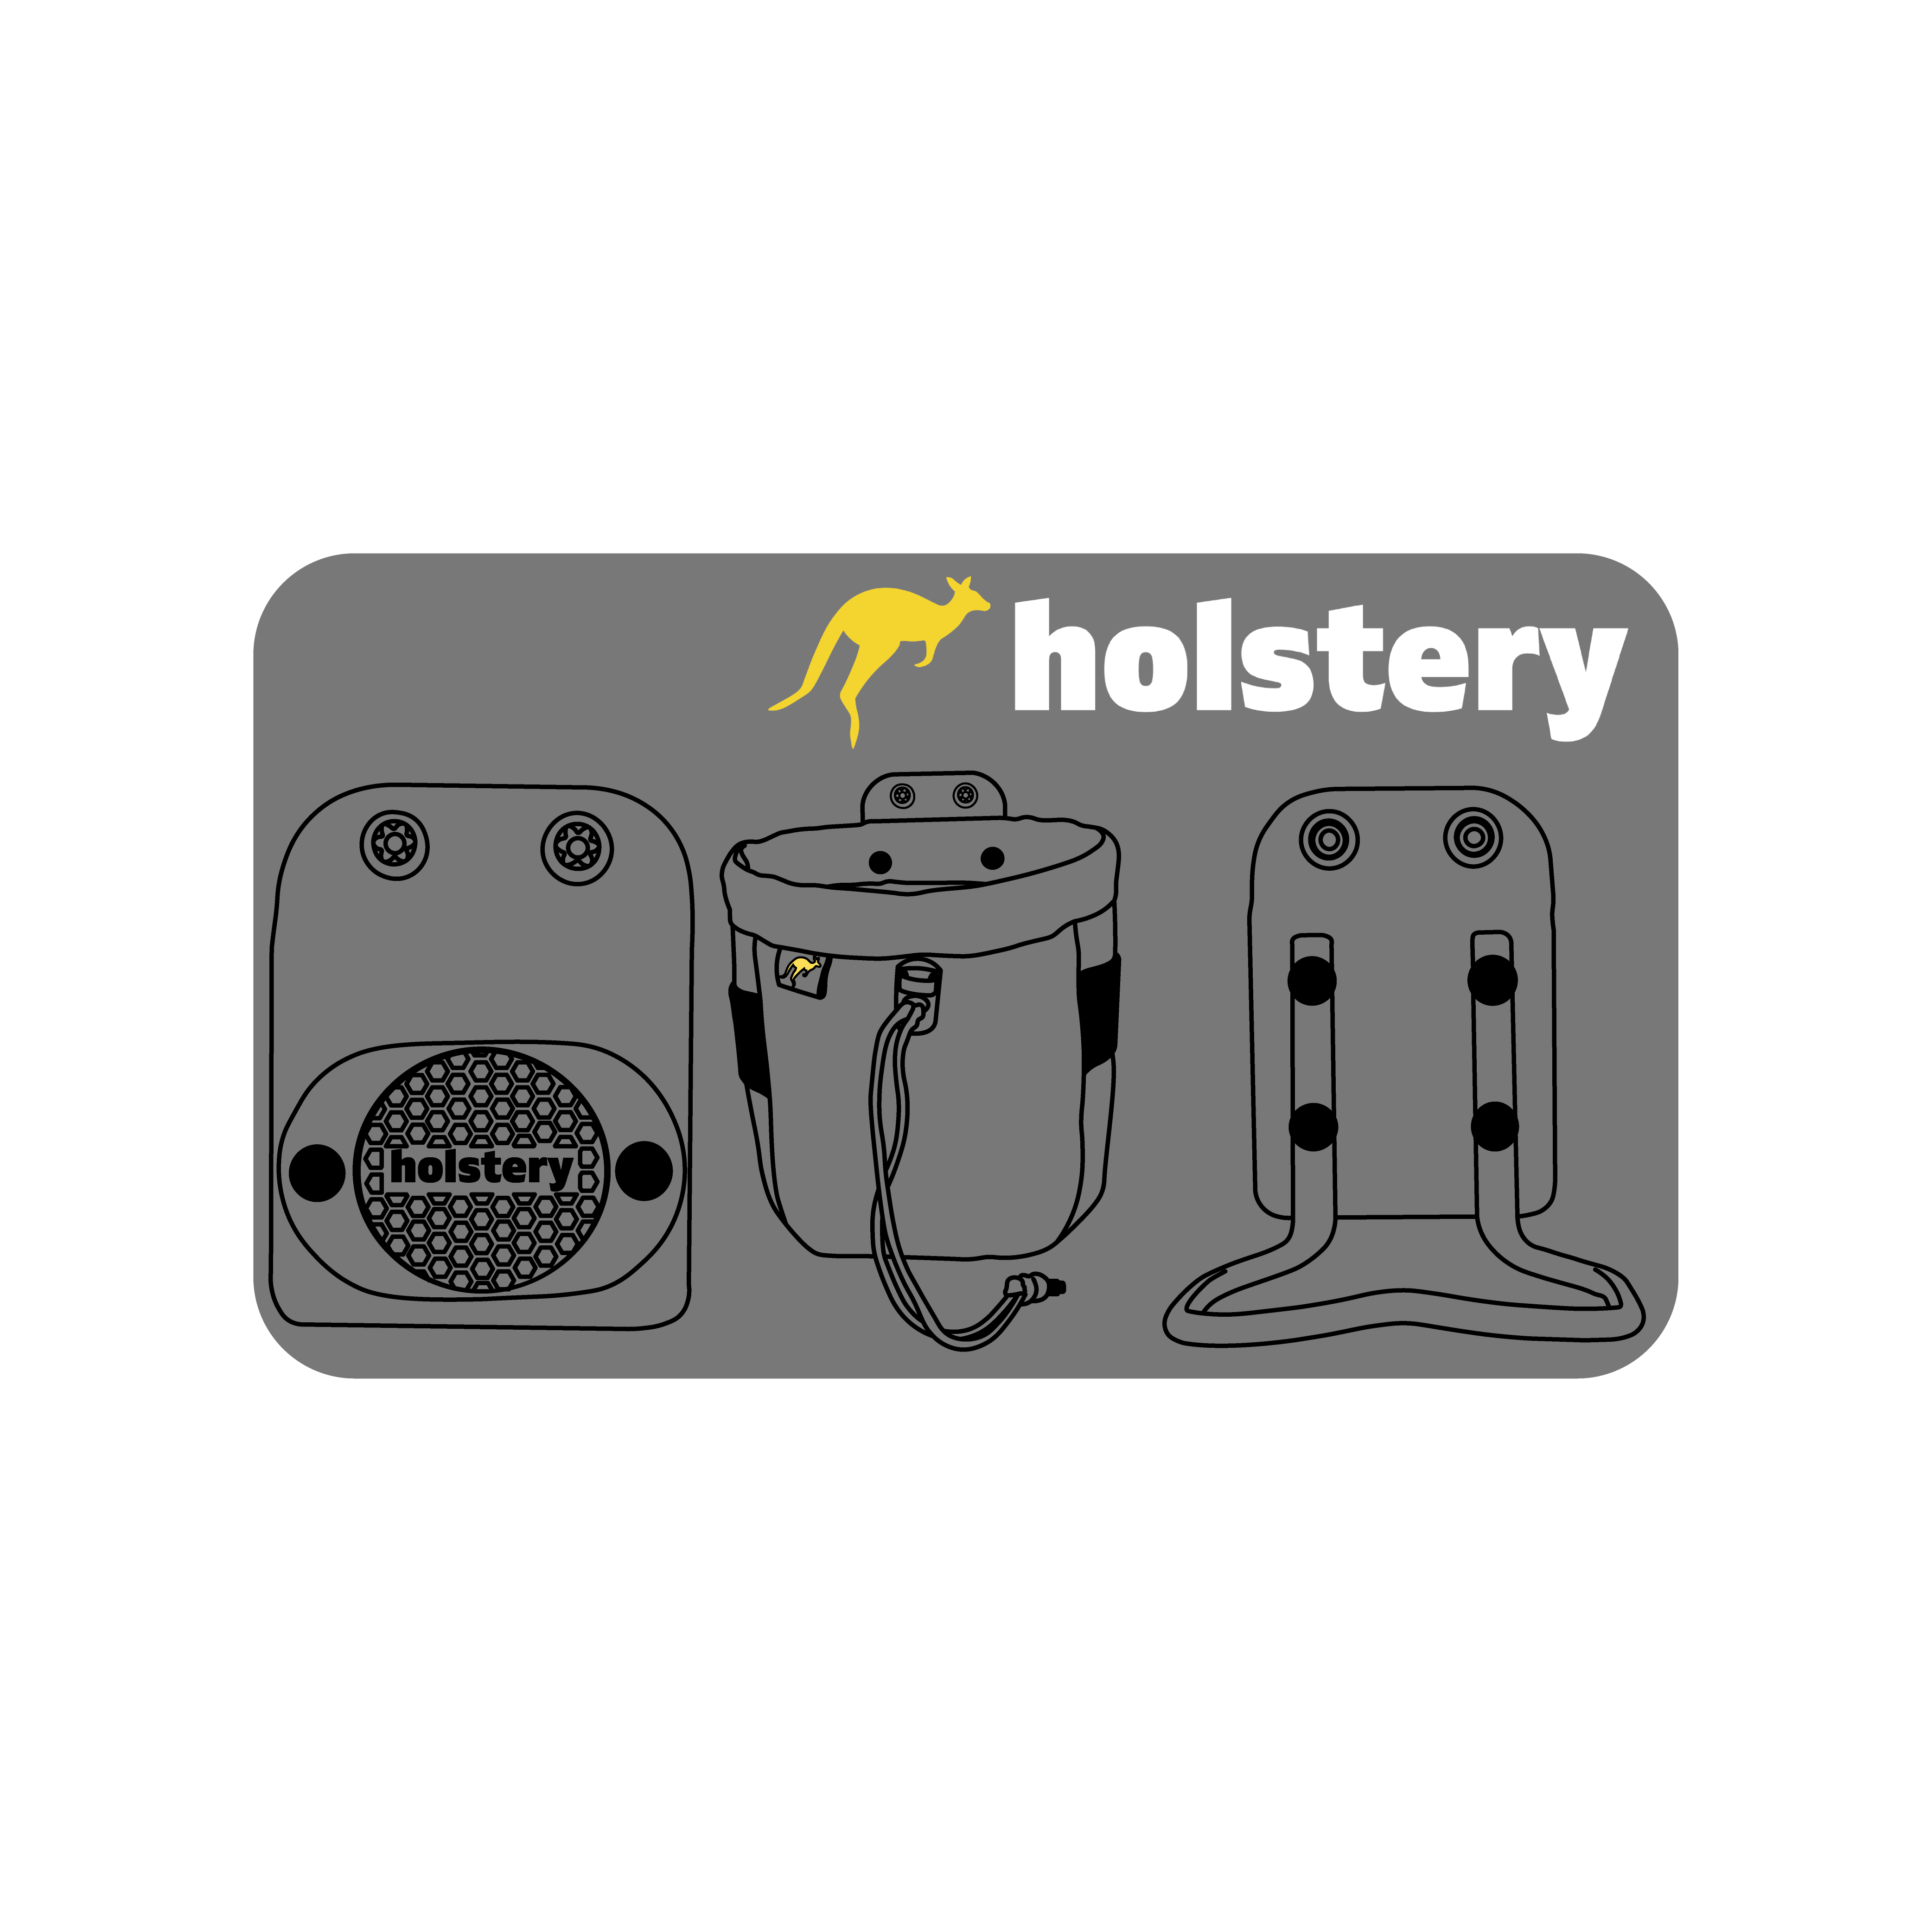 Holstery gift card